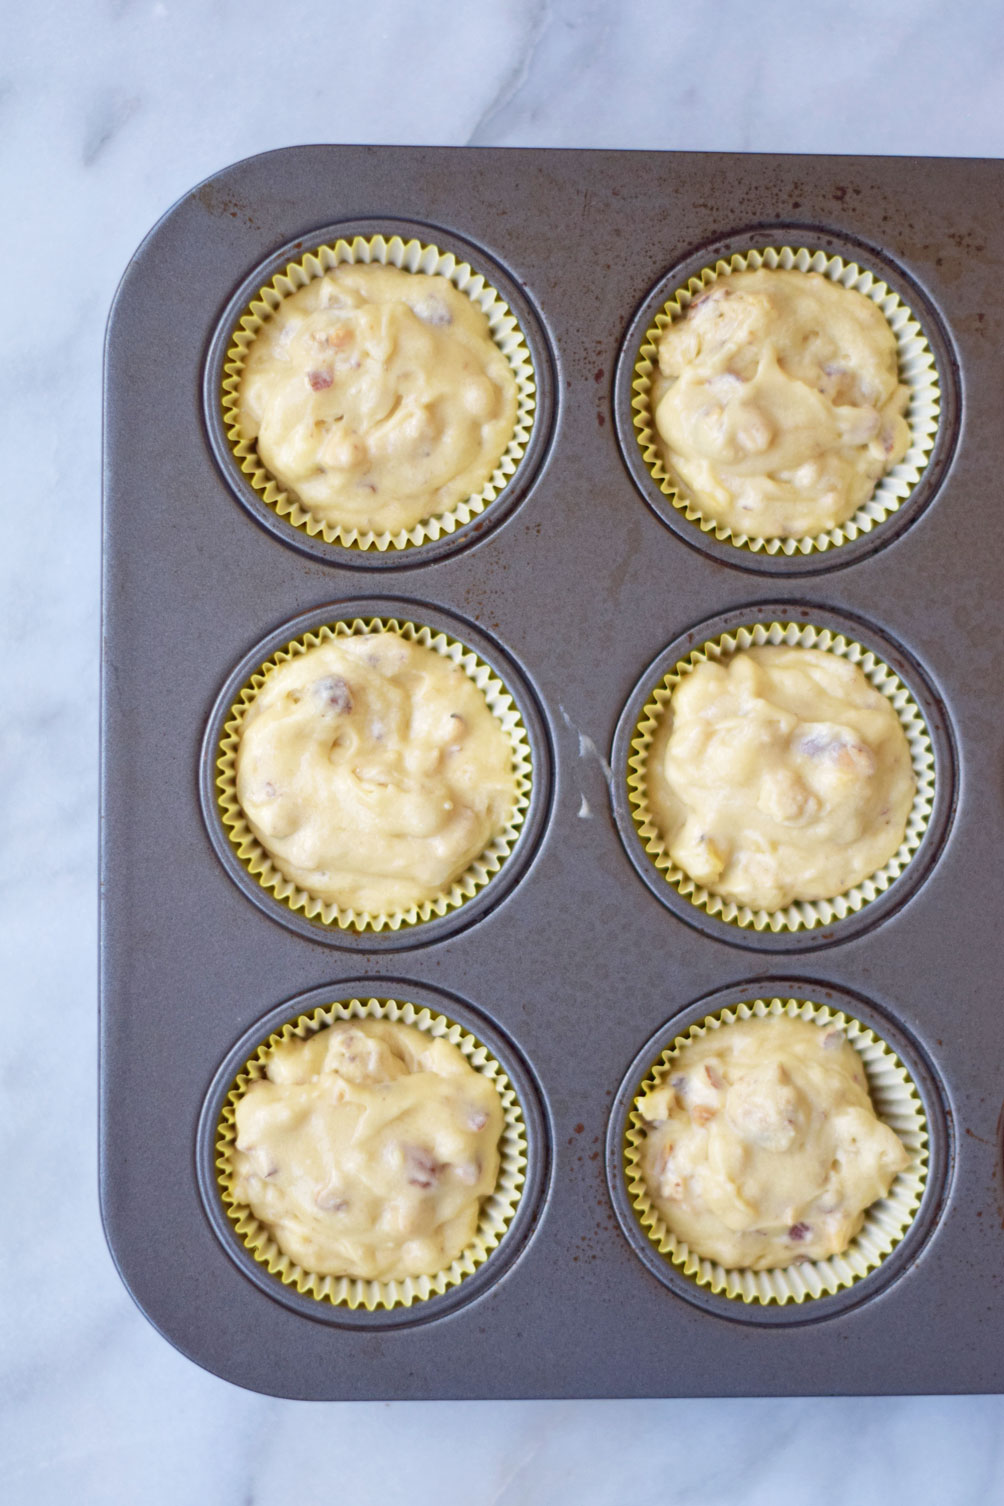 a healthy and delicious breakfast recipe for banana nut crunch muffins from Leslie Musser of one brass fox